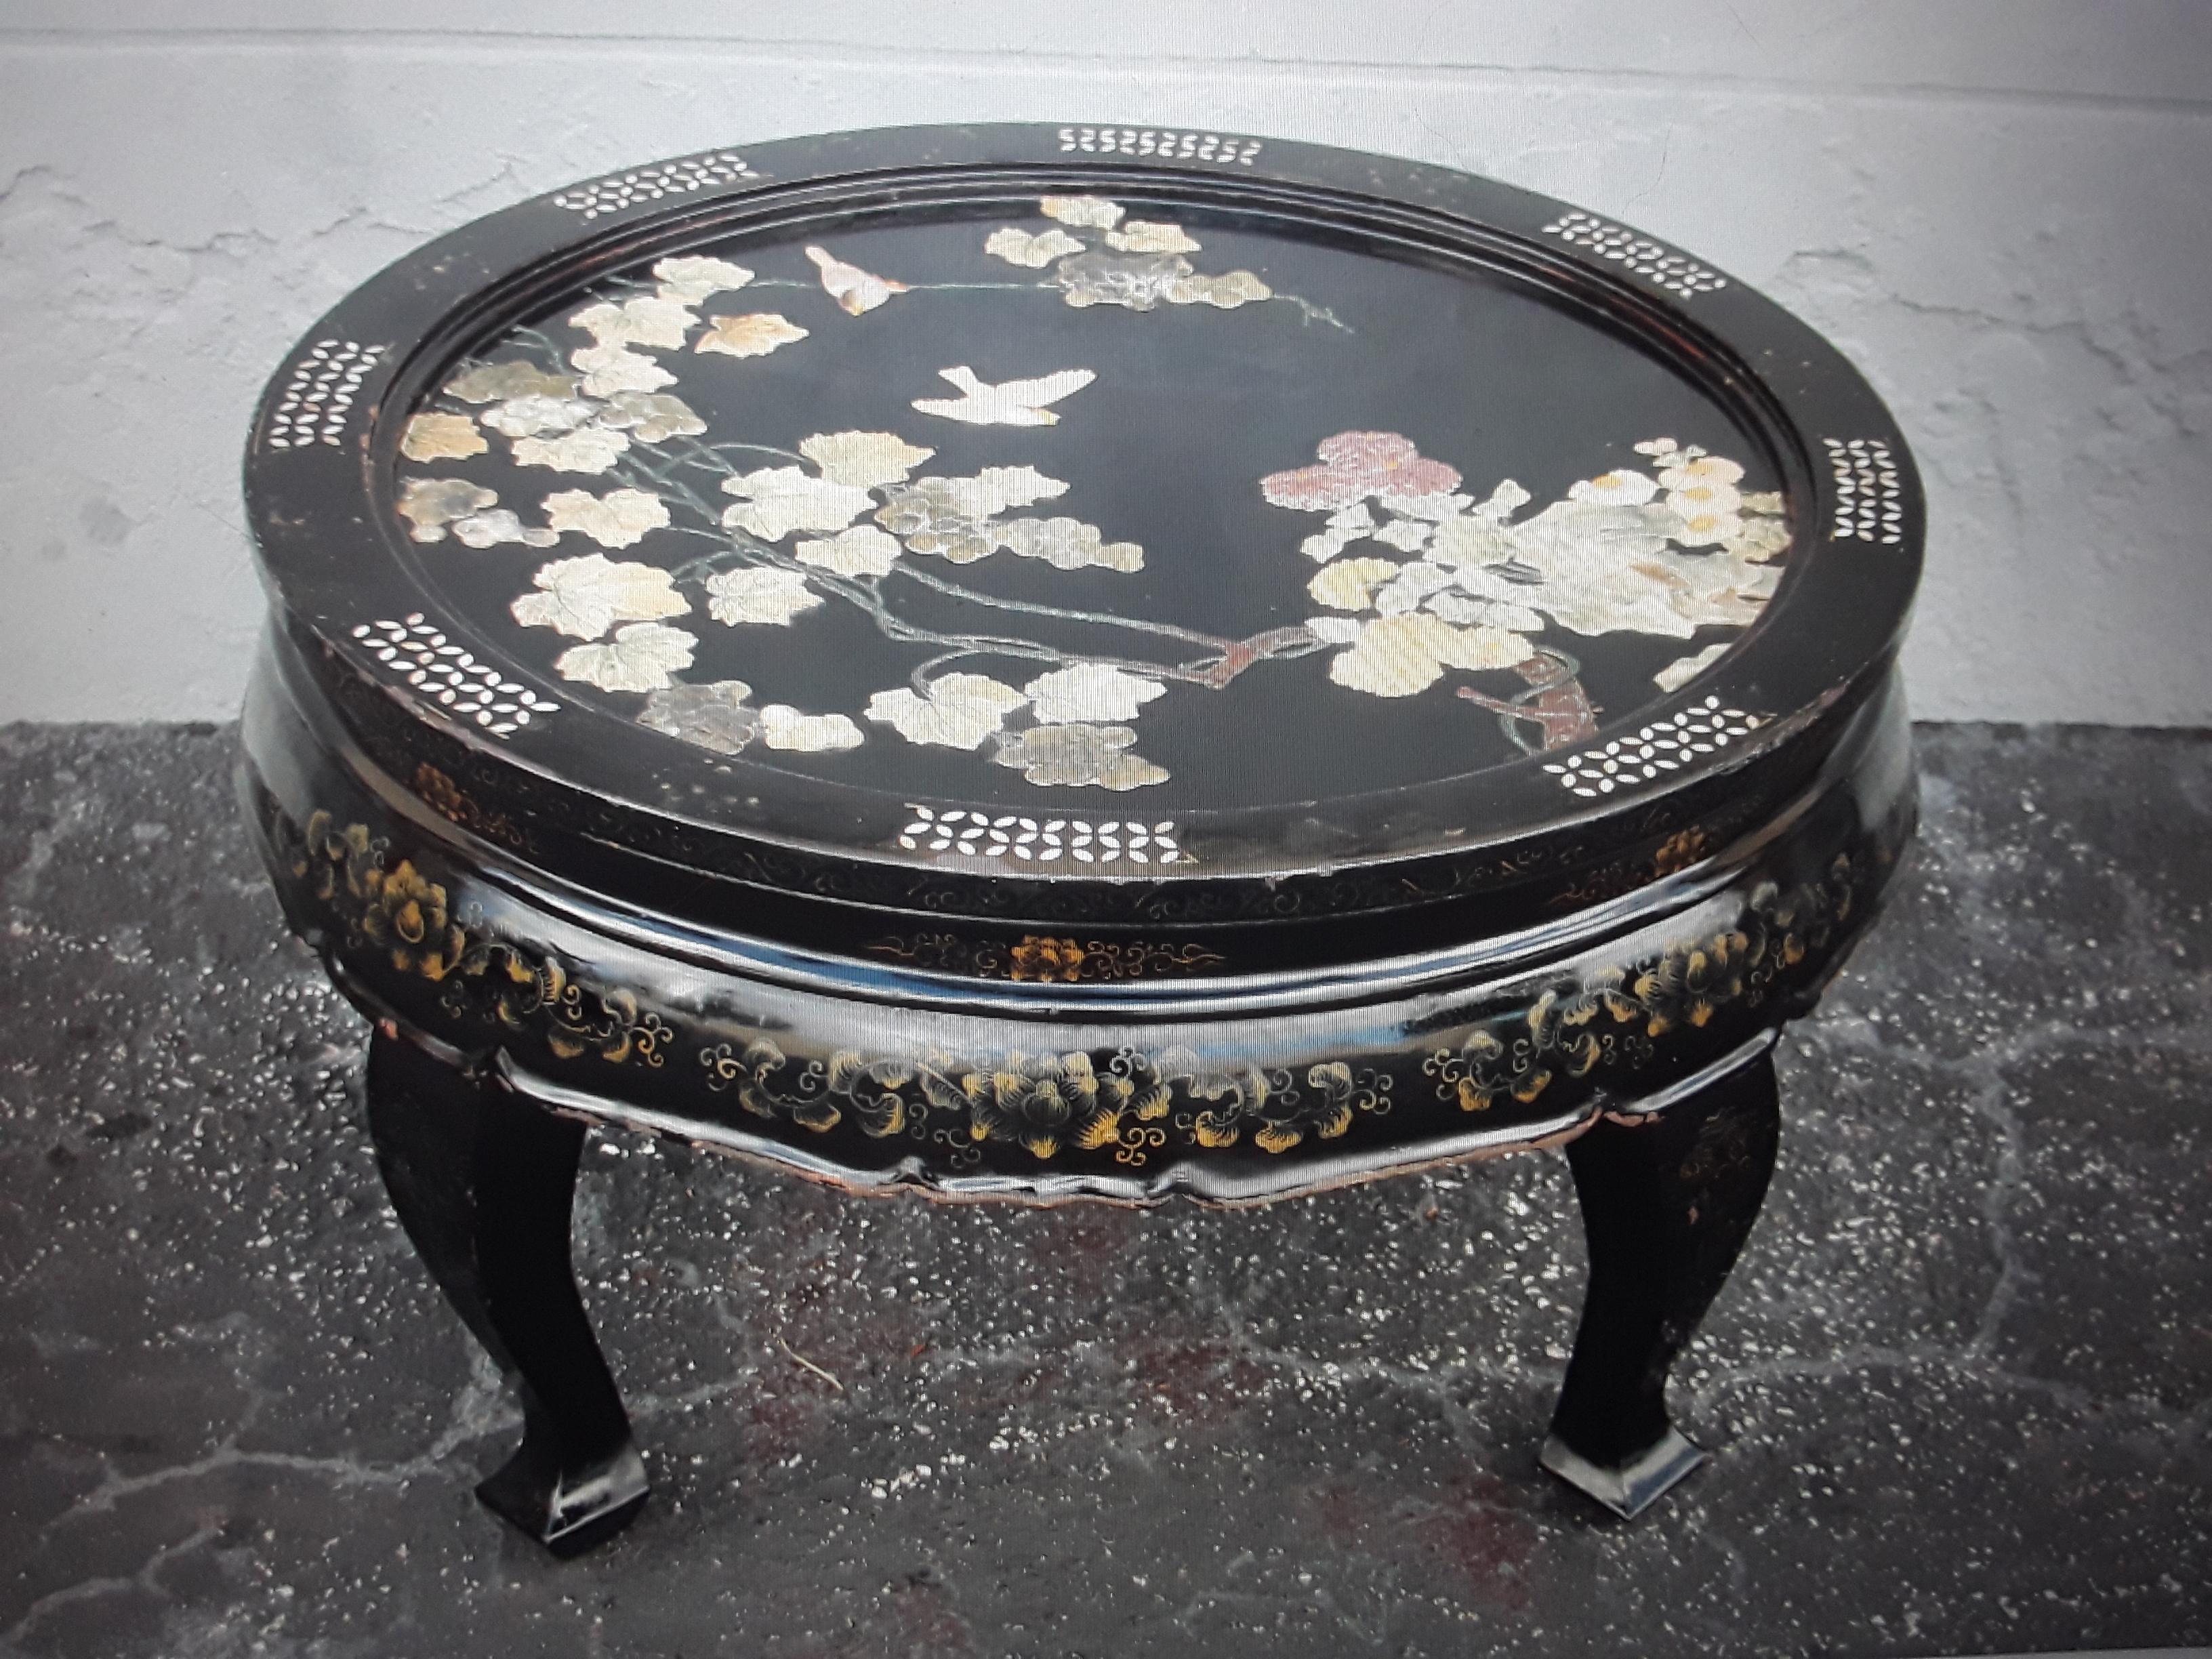 Stunning 1940's Asian Chinoiserie Black Lacquer Floral Form Coffee Table. This table was part of a set bought at auction.